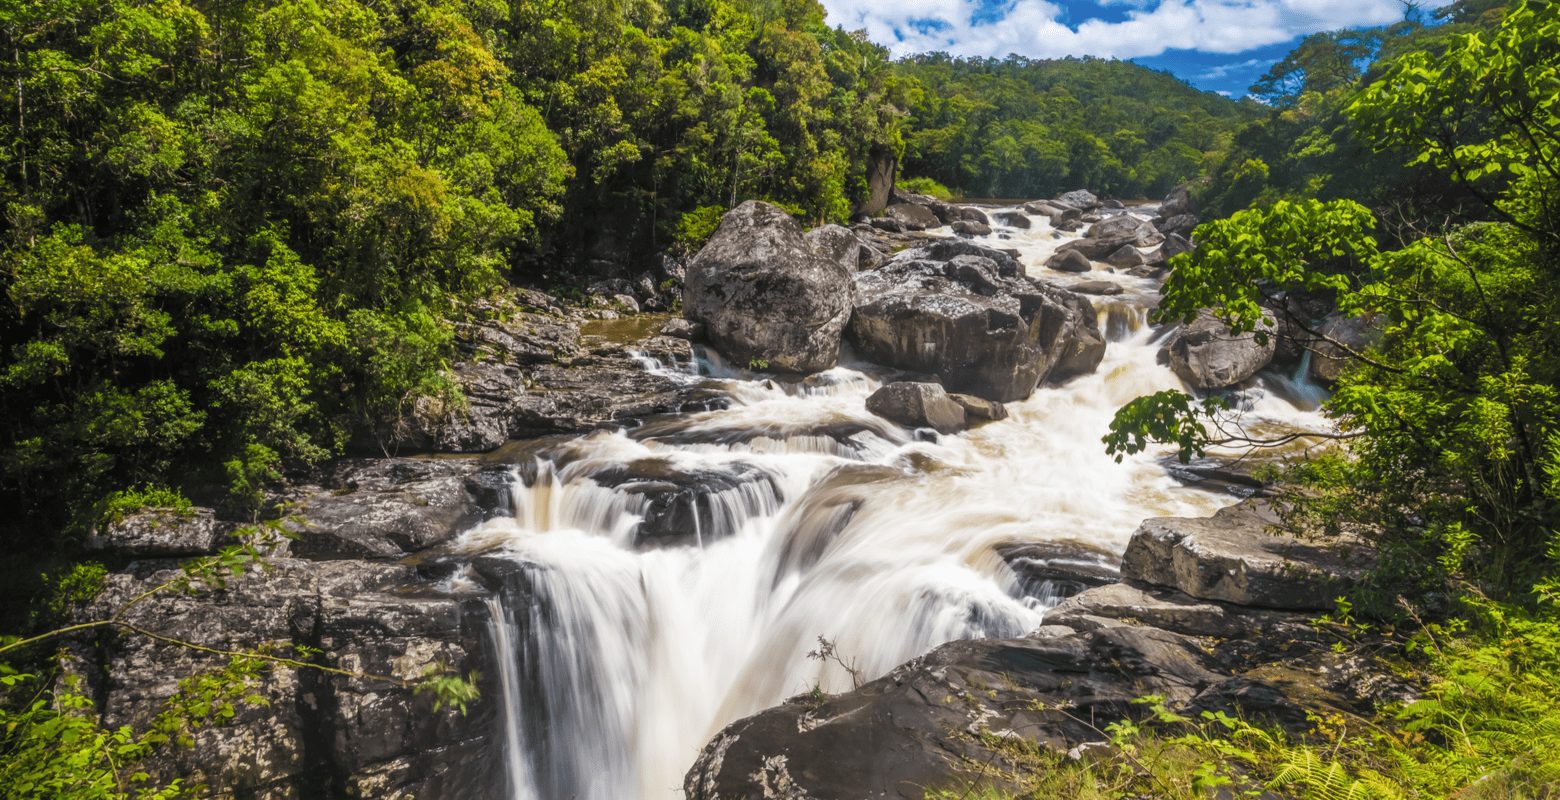 Image of a waterfall in Ranomafana National Park in Malagasy, Madagascar